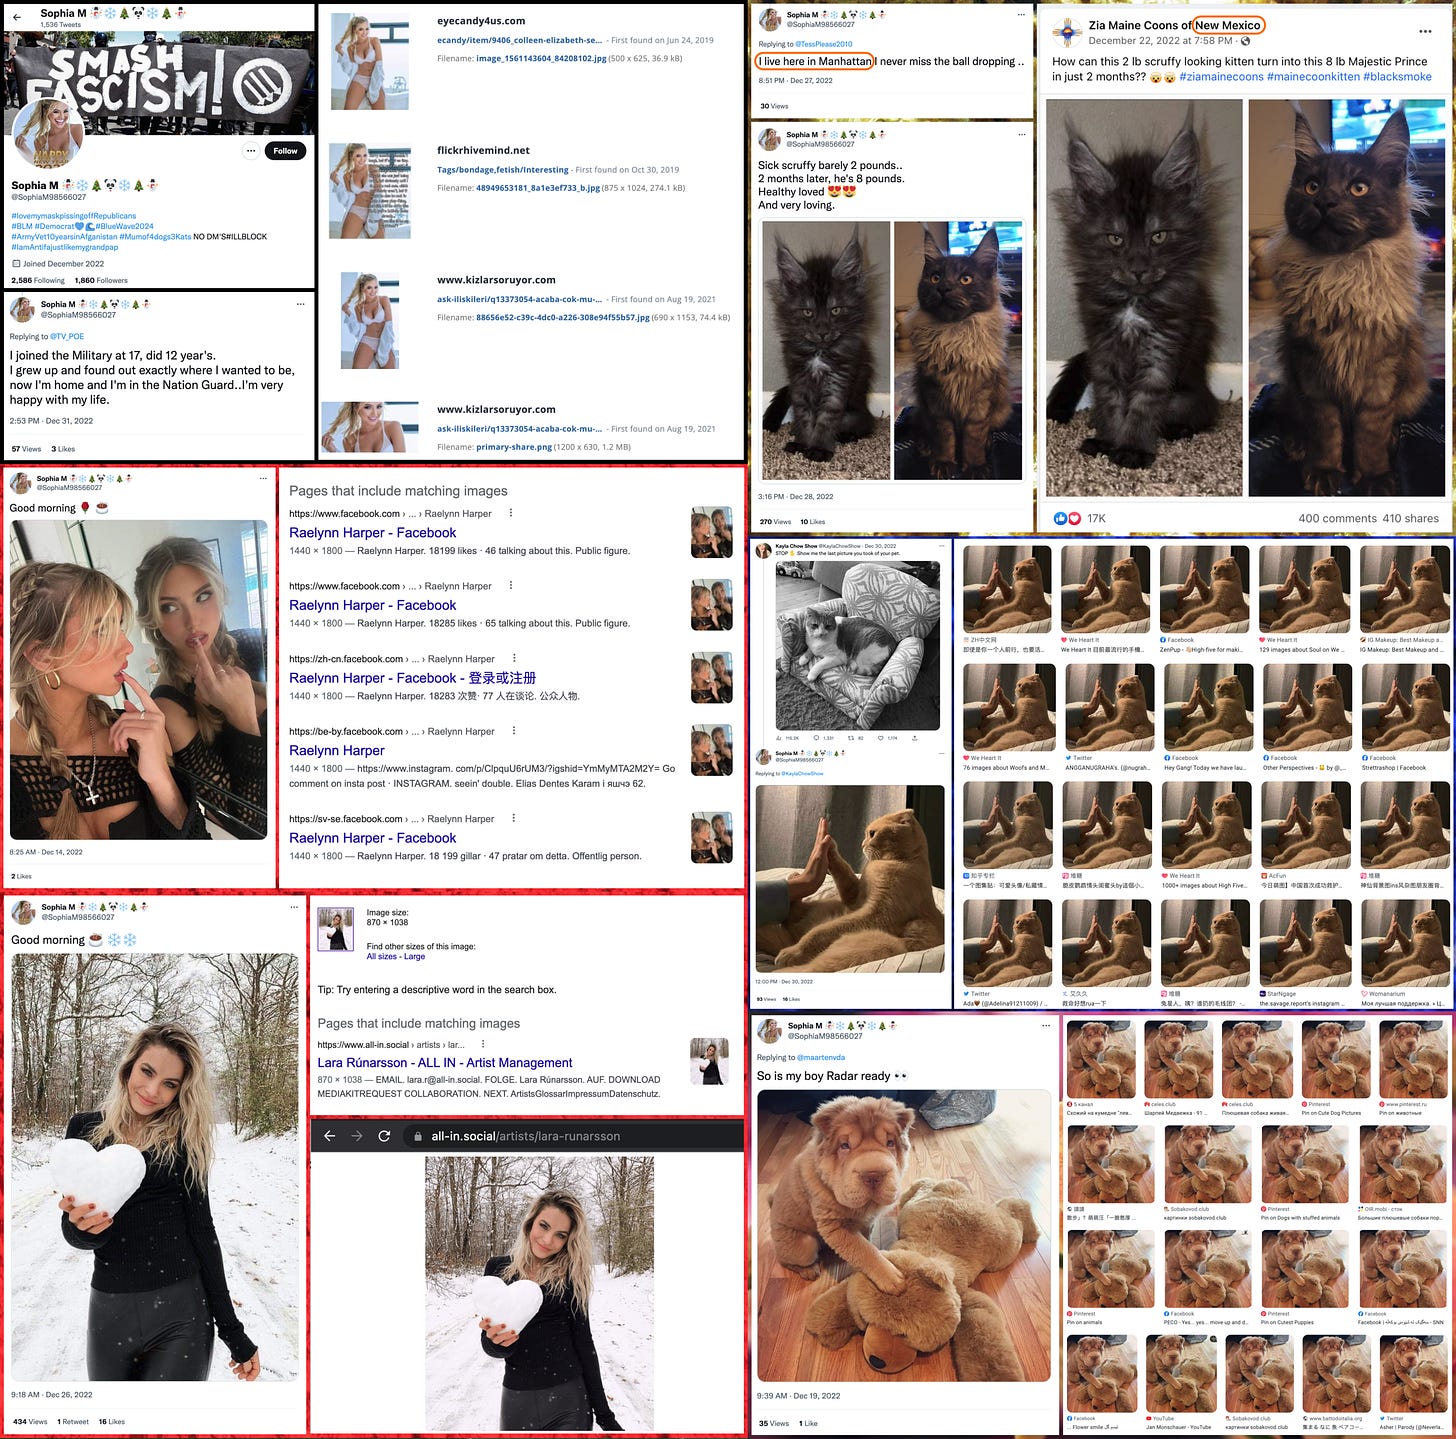 collage of stolen photos of people and pets tweeted by @SophiaM98566027, and reverse image searches showing that the photos are stolen